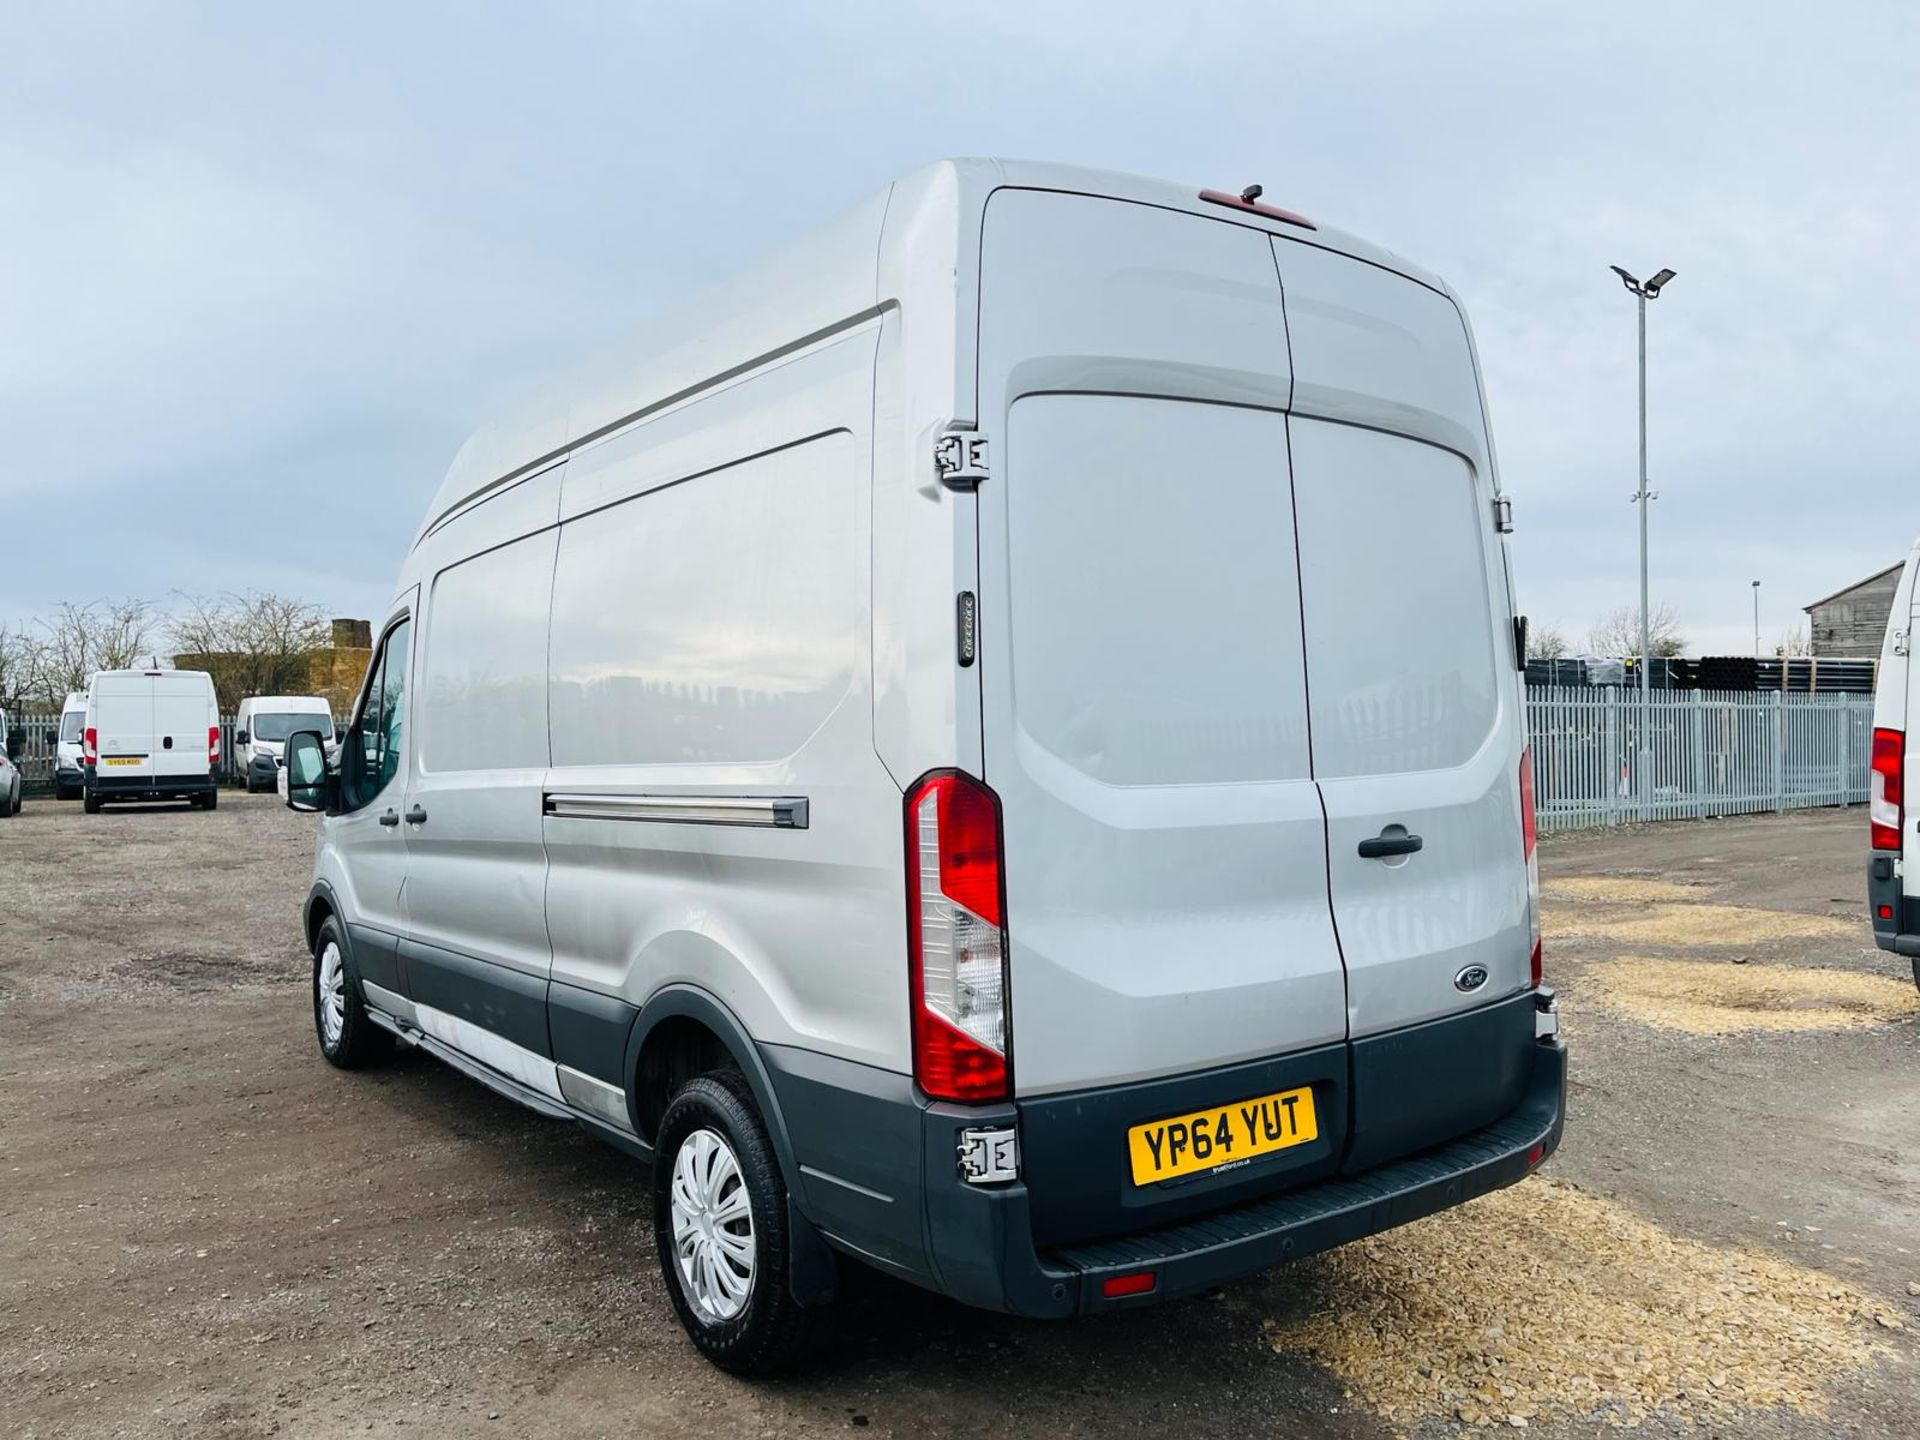 ** ON SALE ** Ford Transit Trend 350 TDCI 125 2.2 L3 H3 2014 '64 Reg' - Parking sensors - Air Con - Image 8 of 27